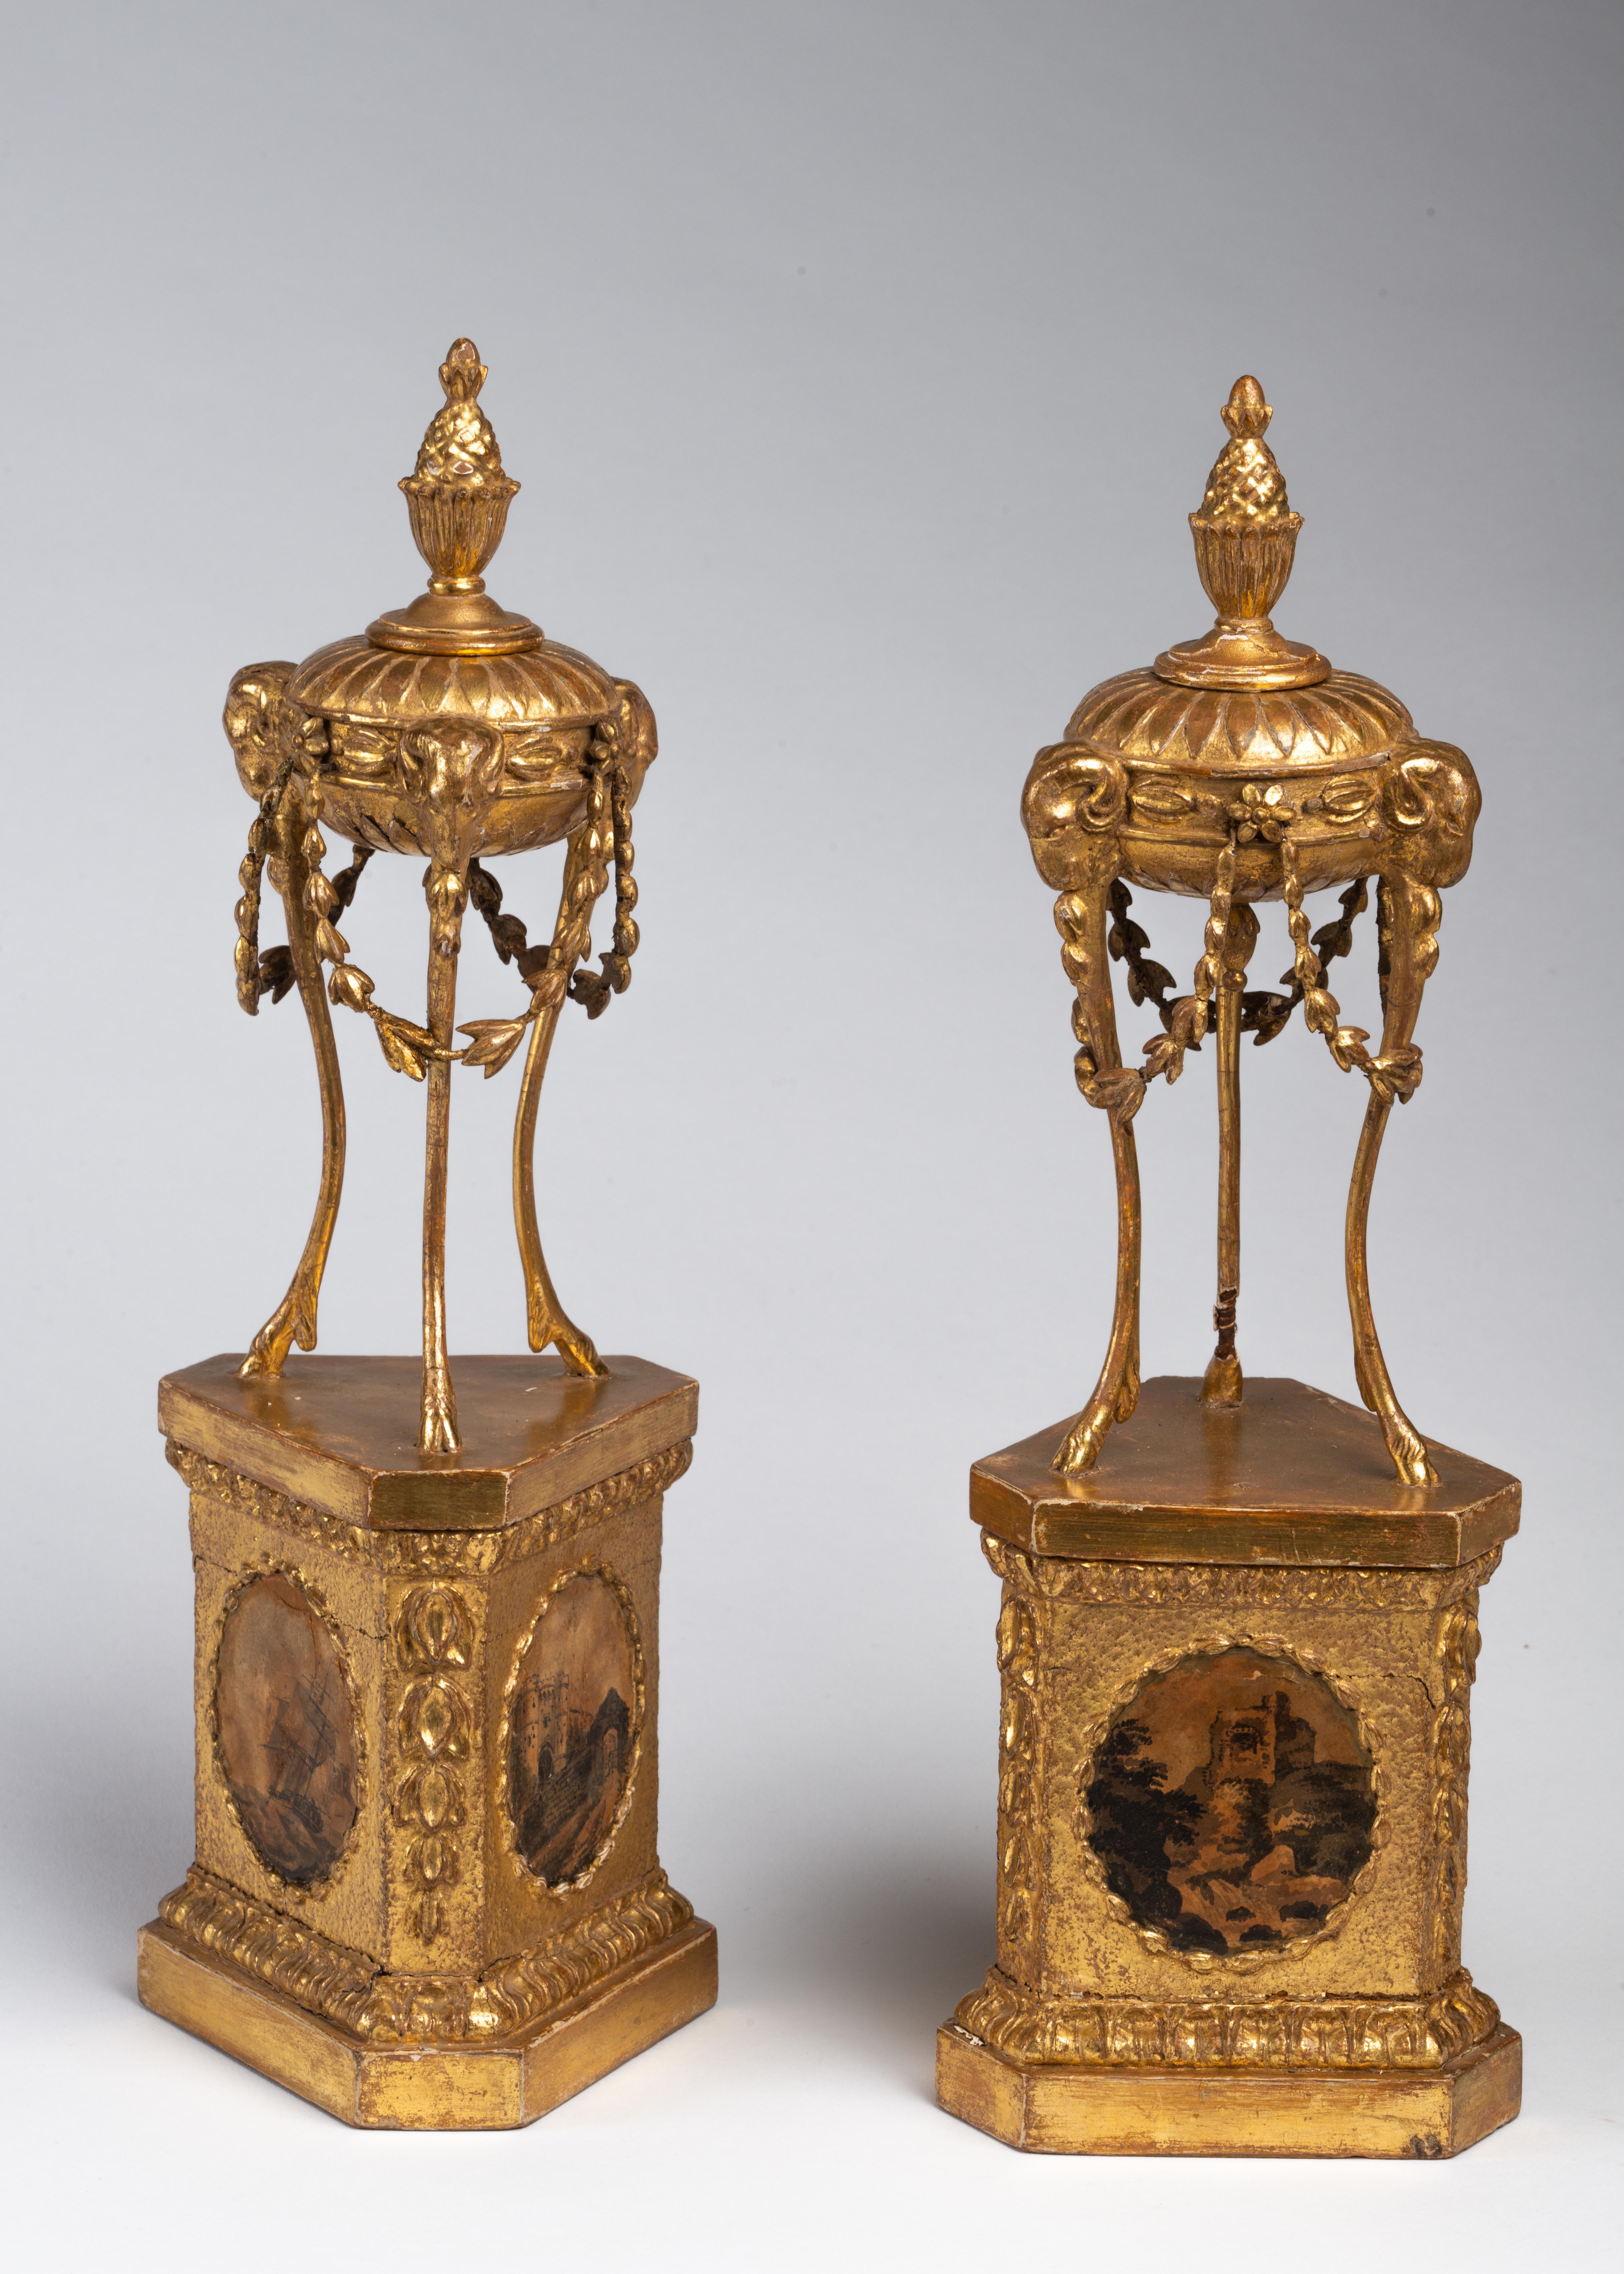 Each in the form of an antique tripod topped with a pineapple finial, draped in floral swags and supported by three ram masks terminating in hoof feet, mounted on a triangular plinth, each side decorated with oval panels framing miniature paintings